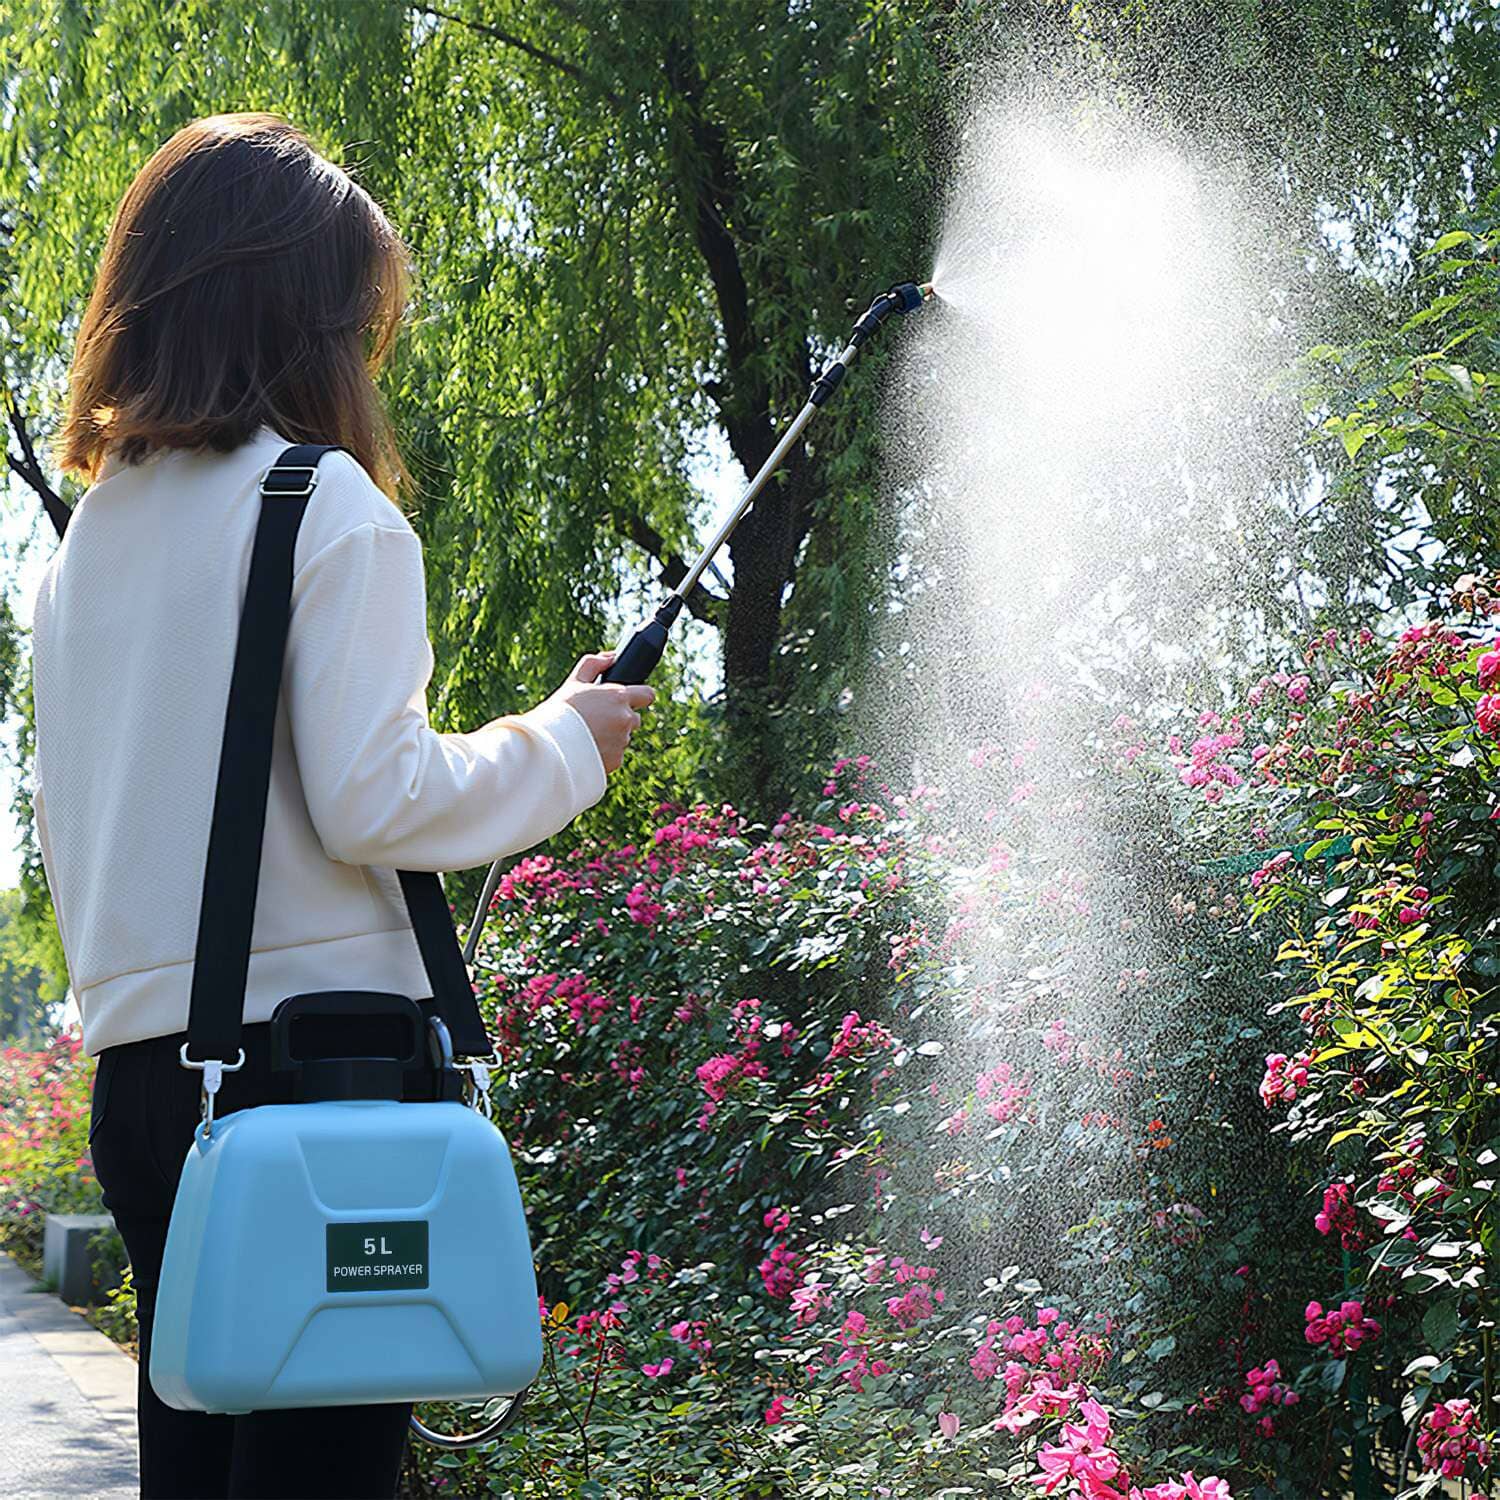 5L/1/3 Gallon Electric Plant Sprayer Telescopic Rechargeable with 3 Spray Sprouts